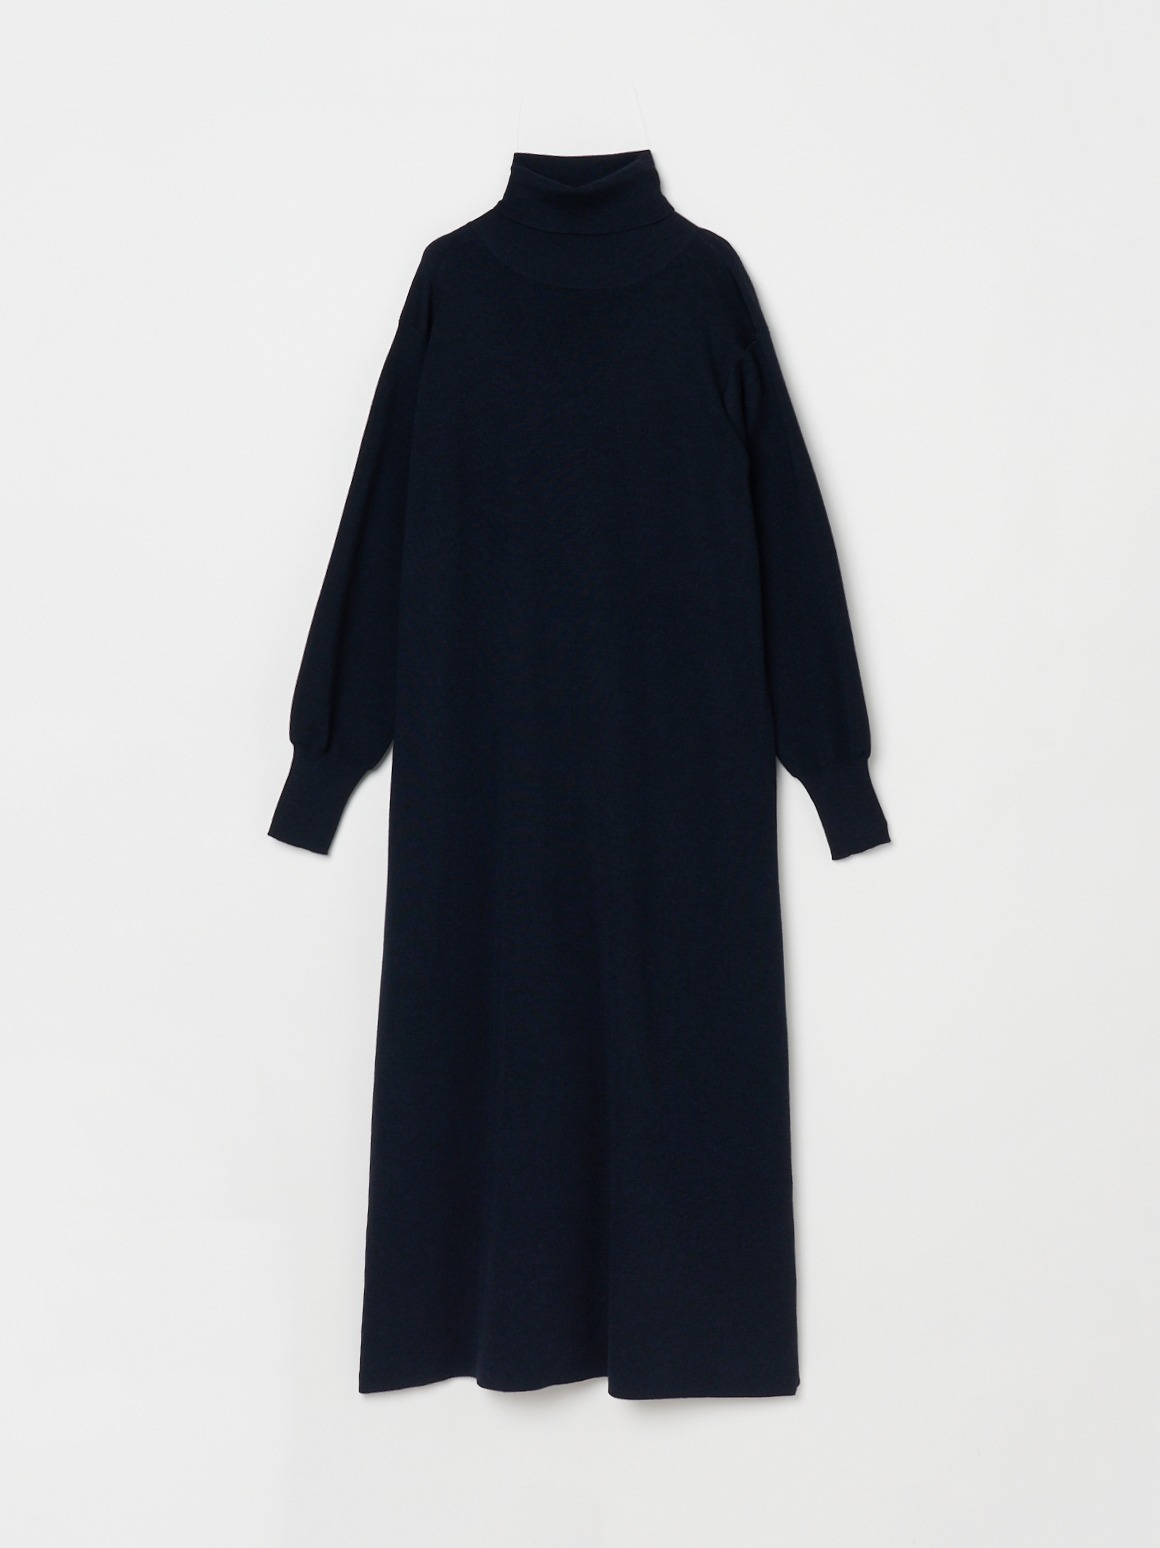 Wool outfit dress 詳細画像 navy 1